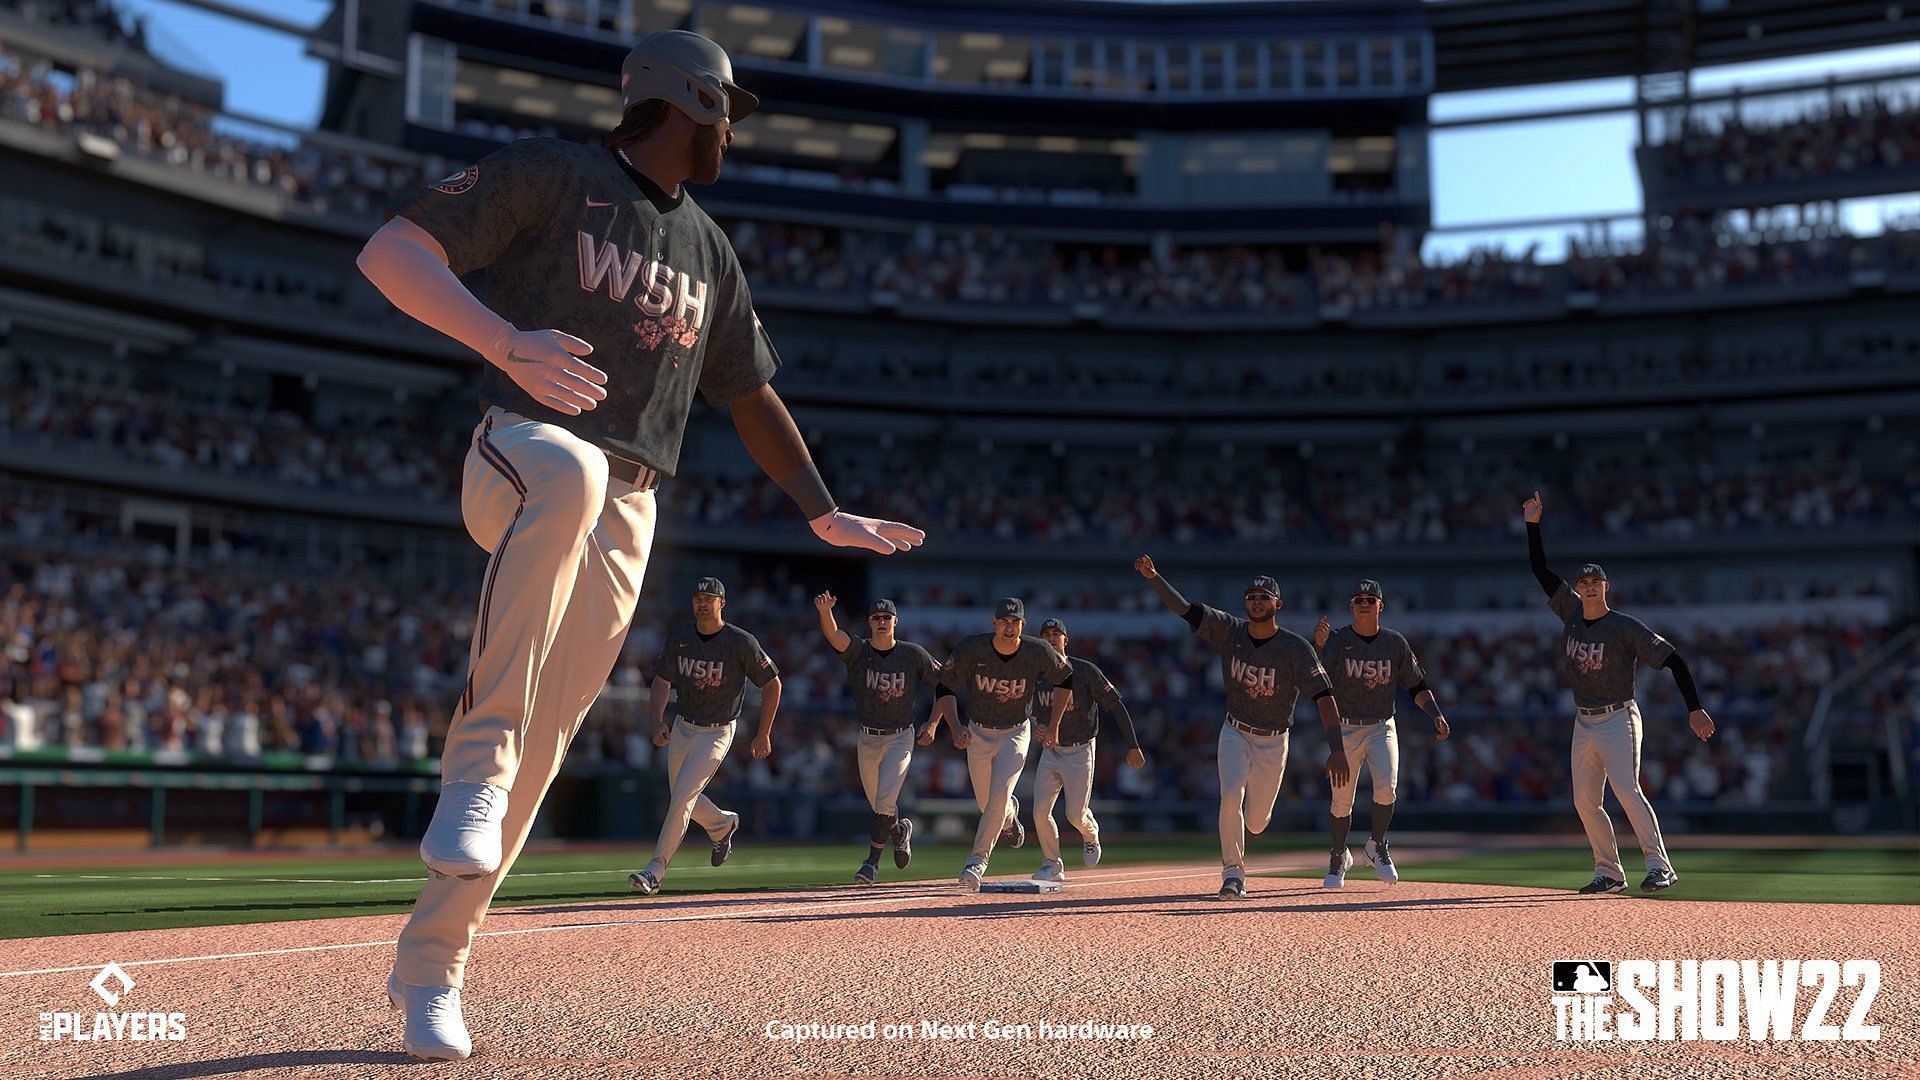 The Washington Nationals in The Show 22 (Image via MLB The Show Twitter page)